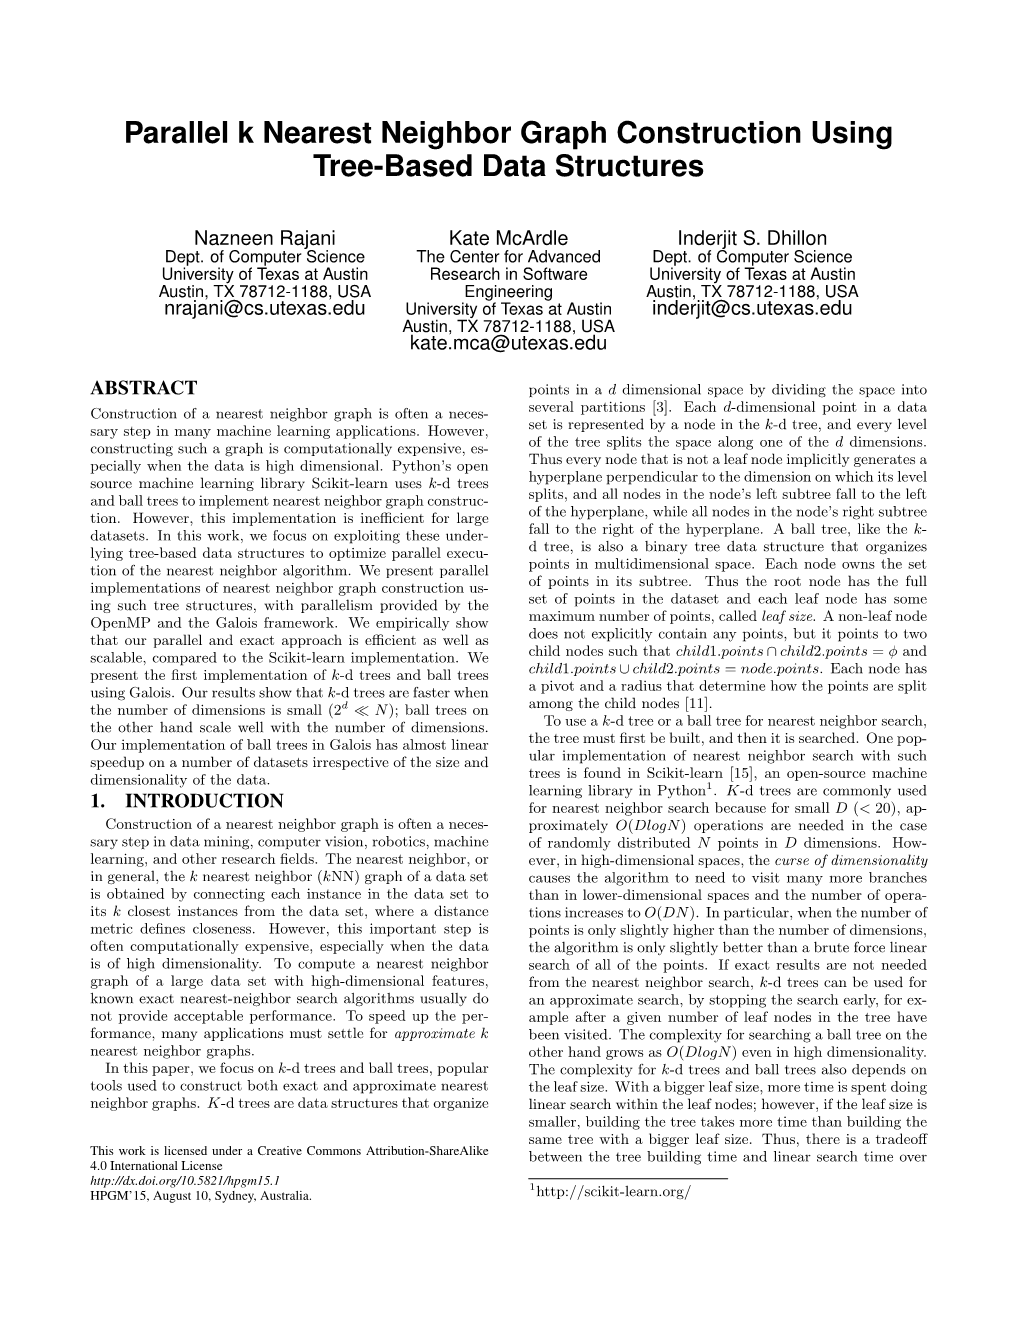 Parallel K Nearest Neighbor Graph Construction Using Tree-Based Data Structures